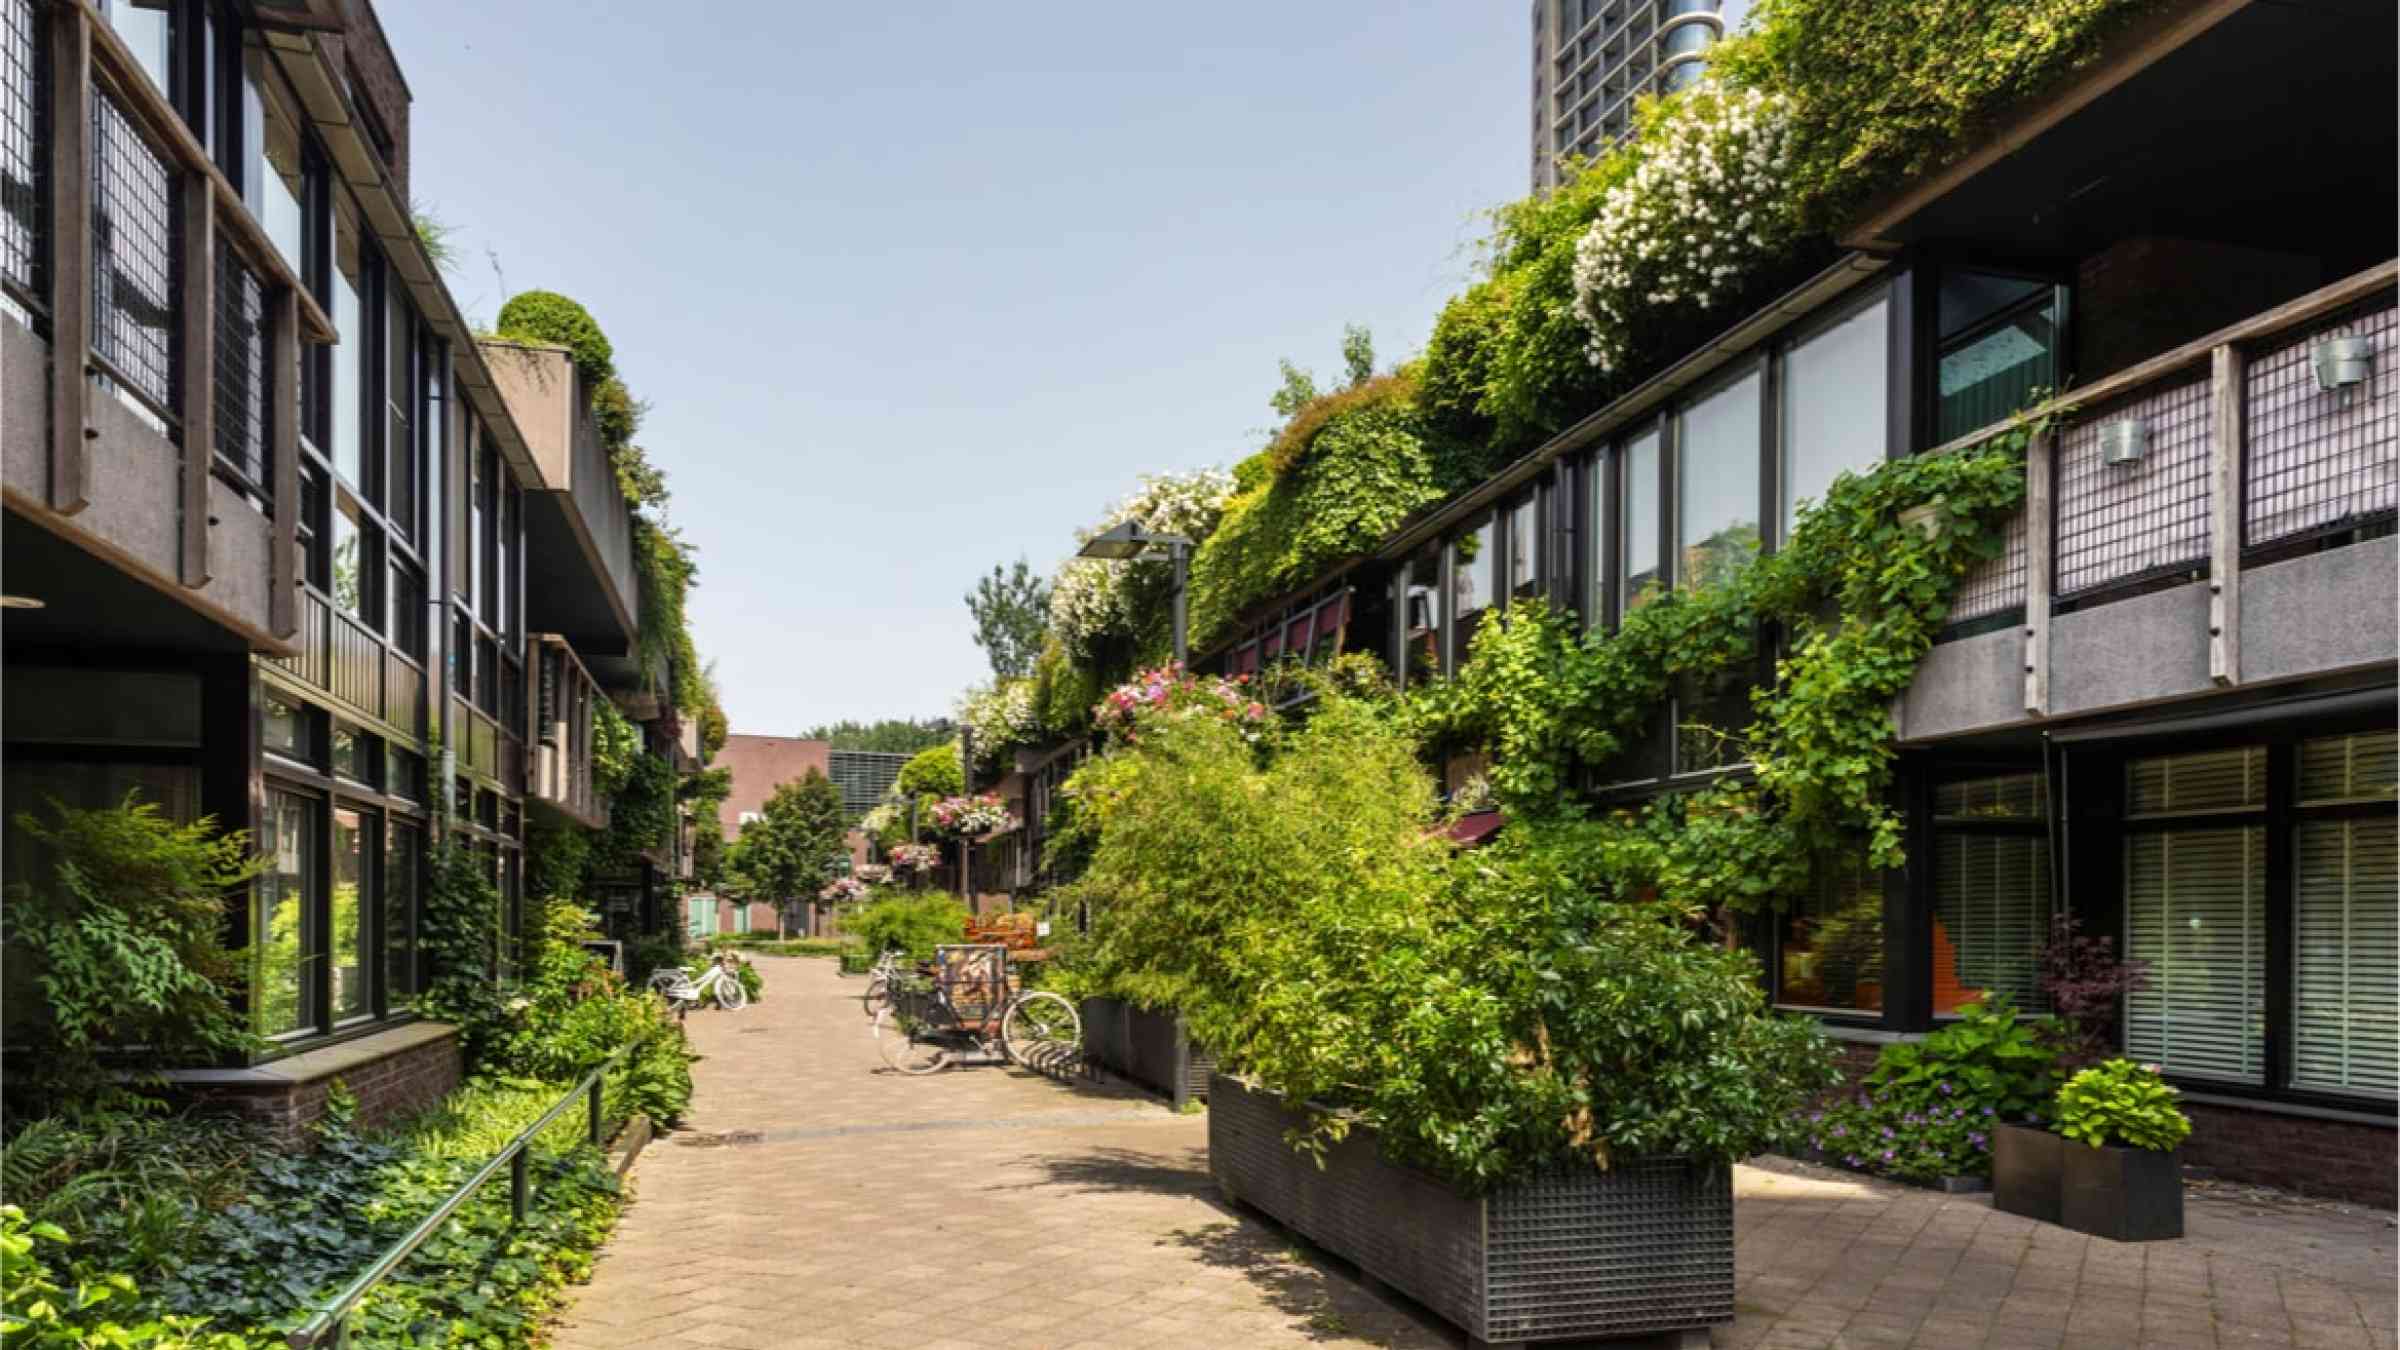 Urban greening on houses is necessary to reduce heat in the city.